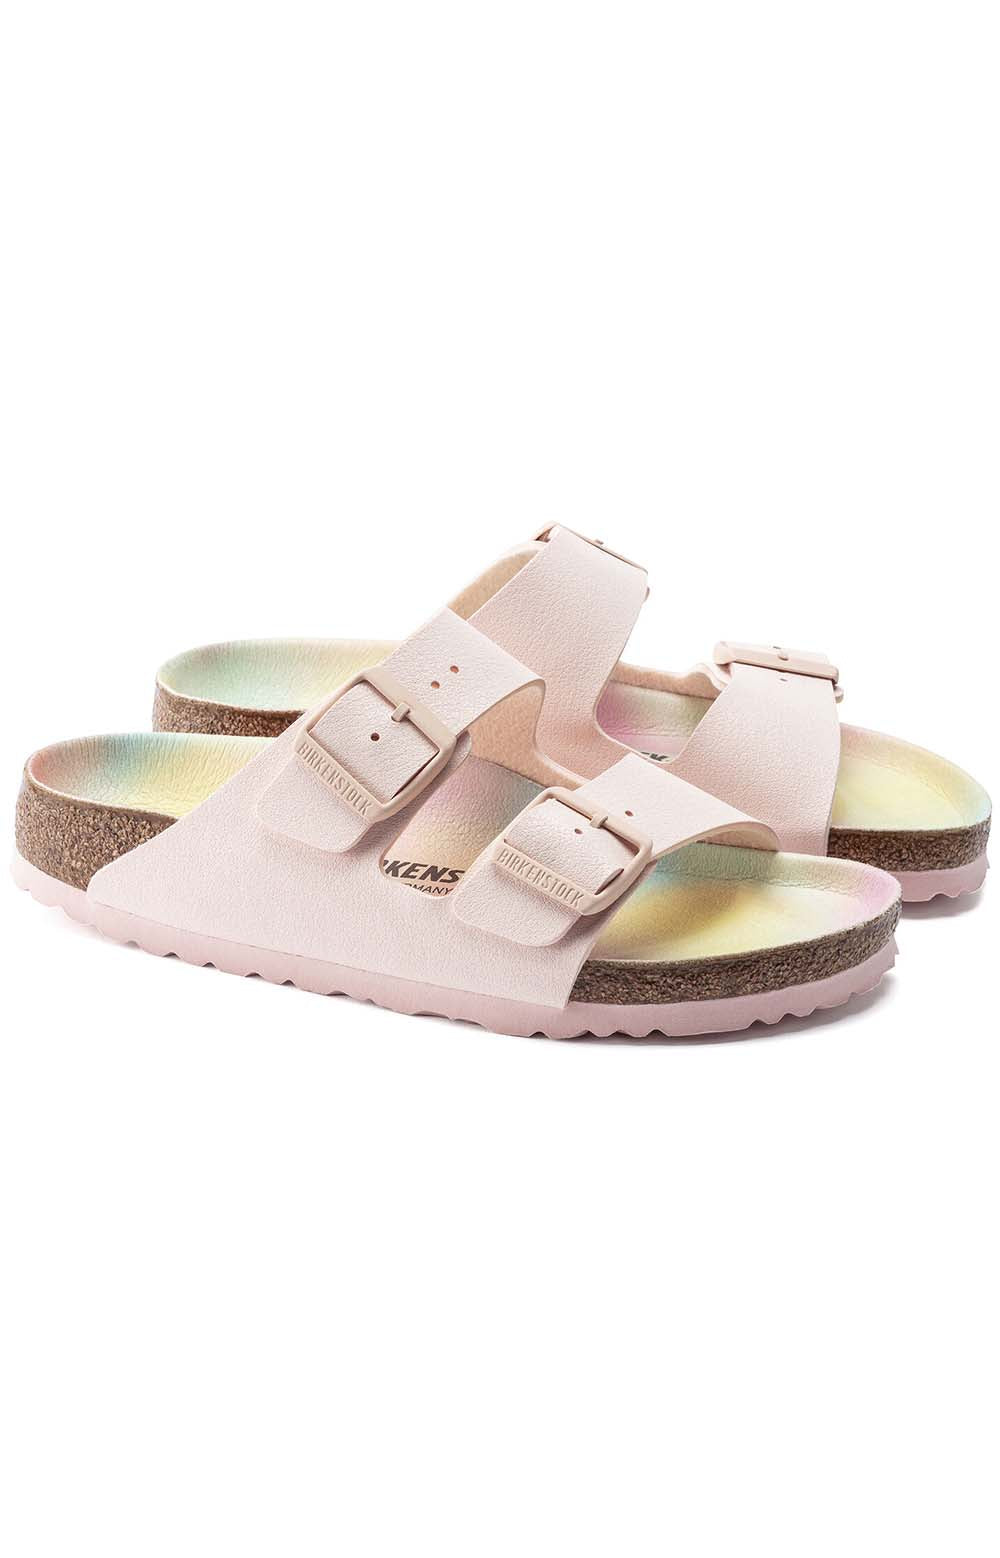 Pair of Arizona Vegan Sandals in light rose, showing the durable rubber sole